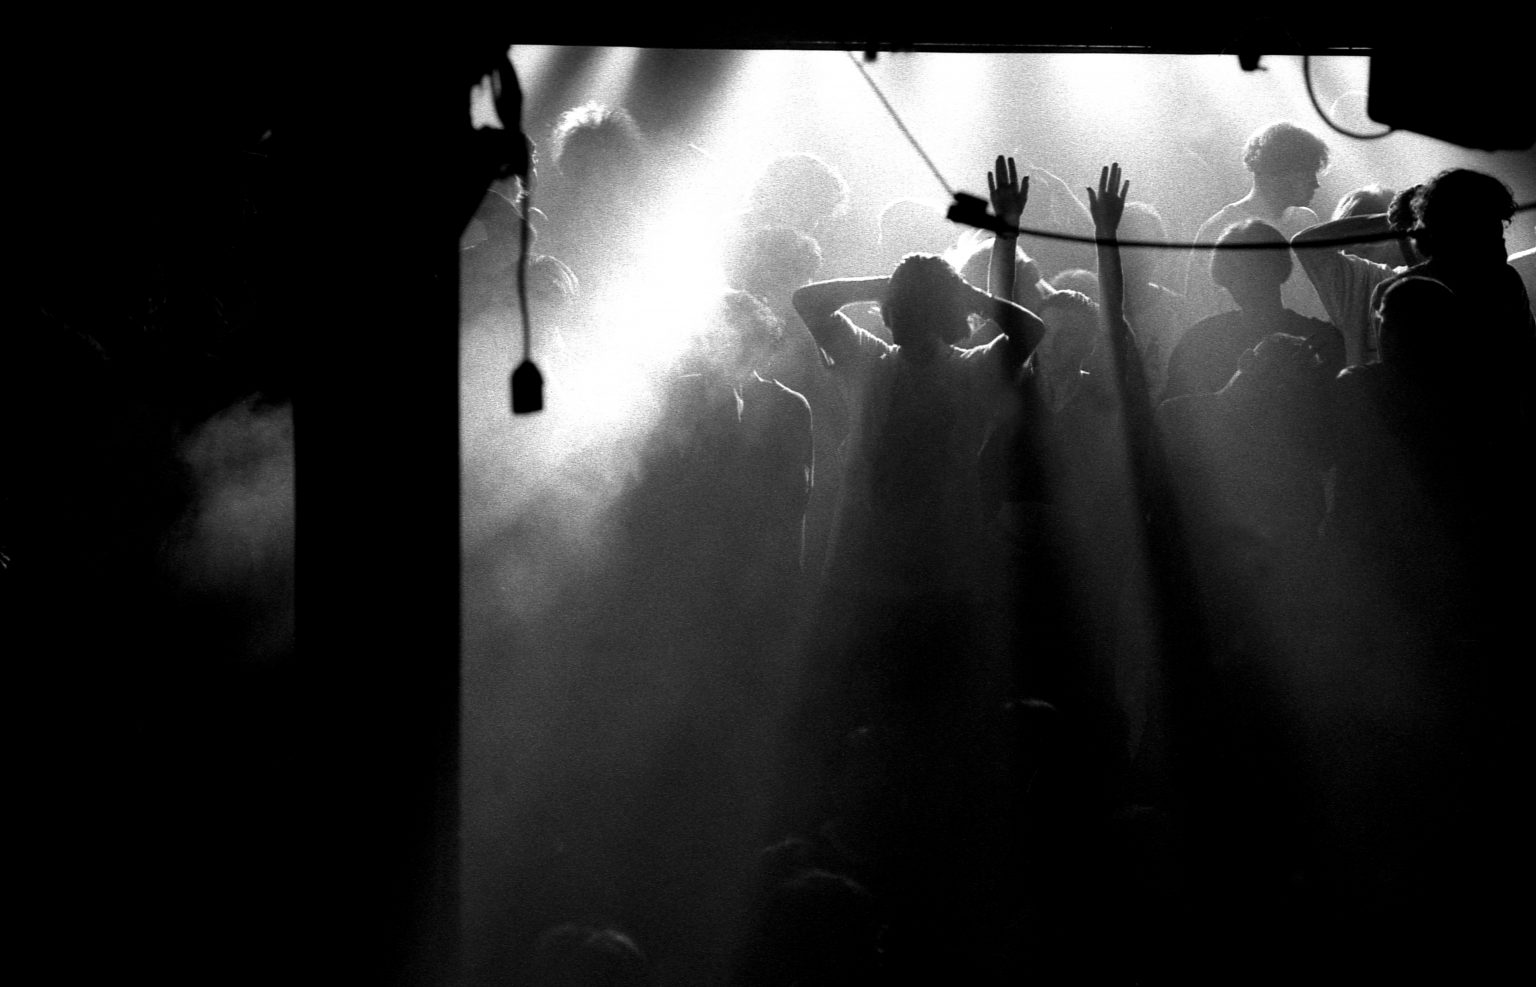 A clubber raises their hands on an atmospheric main stage during a break in the music at the Hacienda, Manchester 1988. (Photo by Peter J Walsh/Peter J Walsh/PYMCA/Avalon/Getty Images)